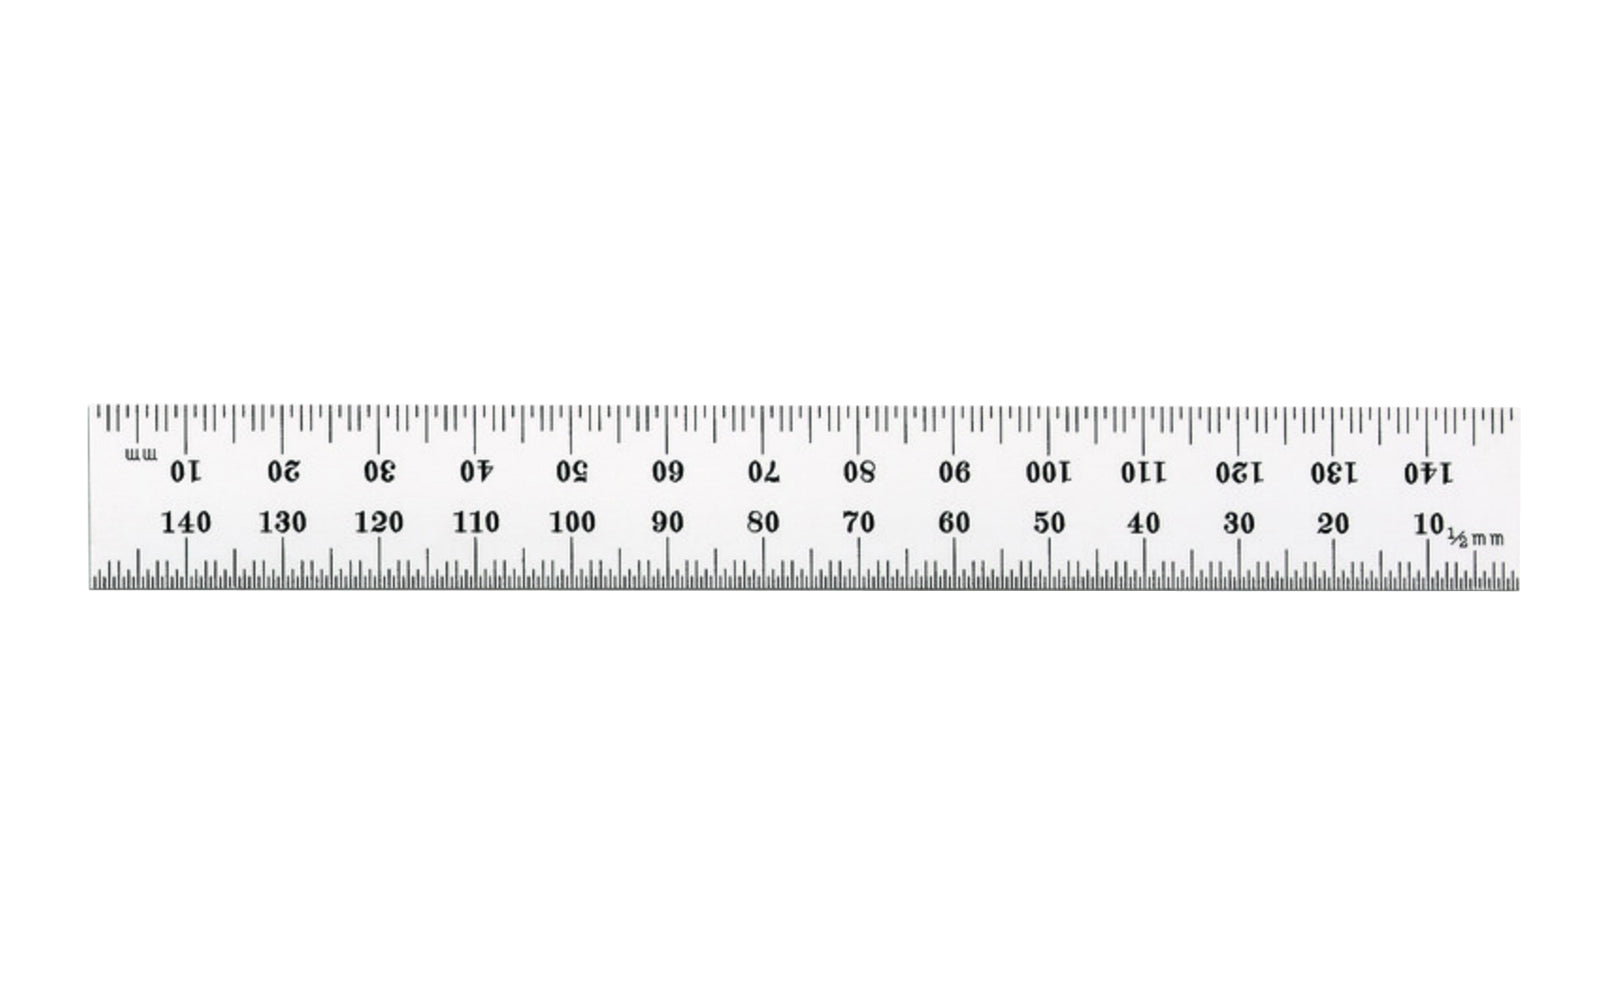 Starrett 6" Metric Rule - 1.0 mm, 0.5 mm Grads. The Starrett 150mm (6") Steel Rule with Millimeter Graduation features a satin chrome finish. Graduations at mm and 1/2mm on both sides.   Made in USA.